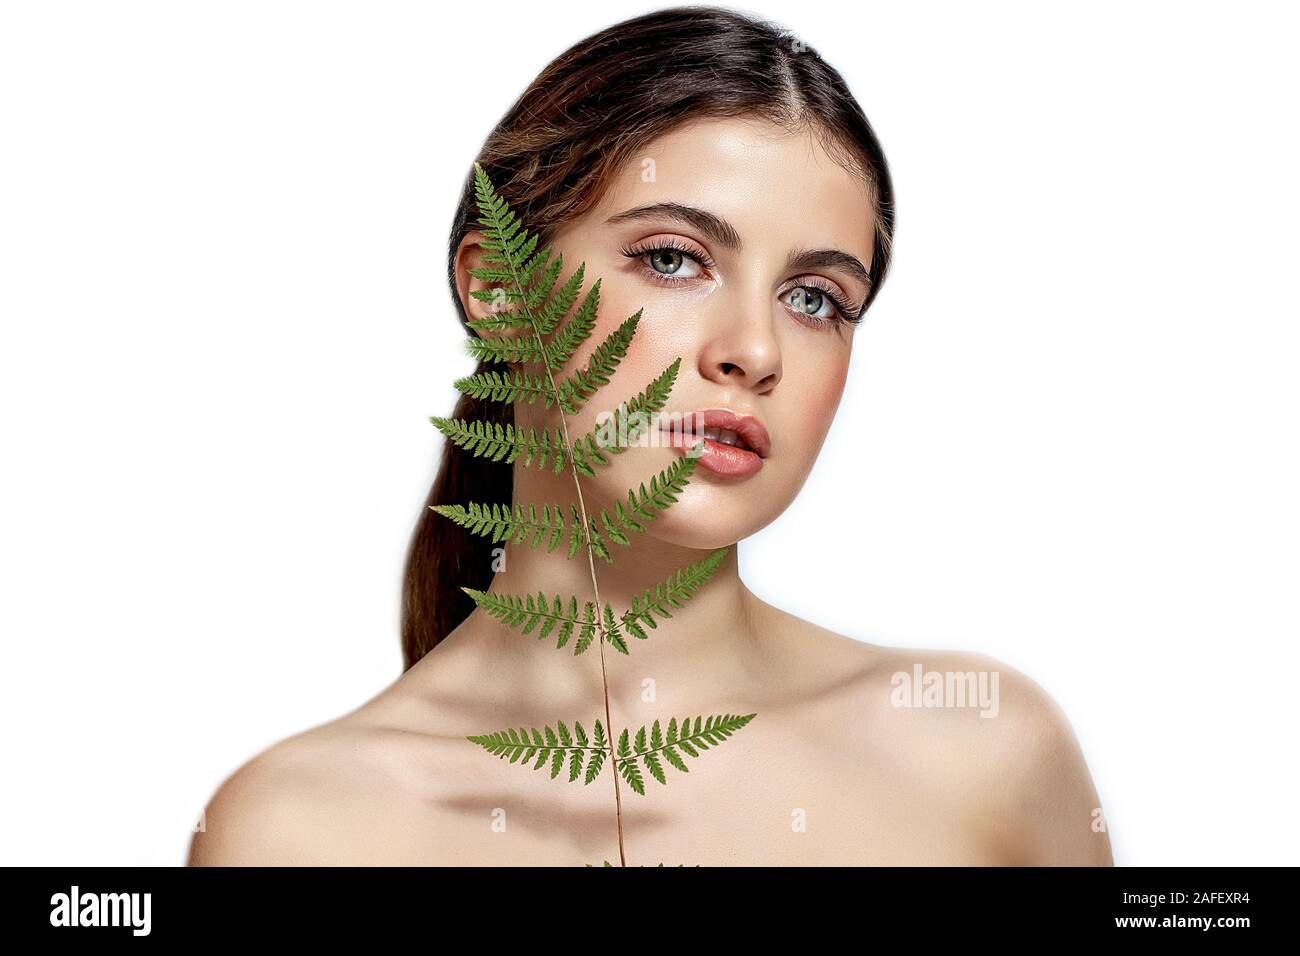 Portrait of an adult brunette woman on a white background with green fern, skin care concept, beautiful skin and hands with nail manicure. Stock Photo